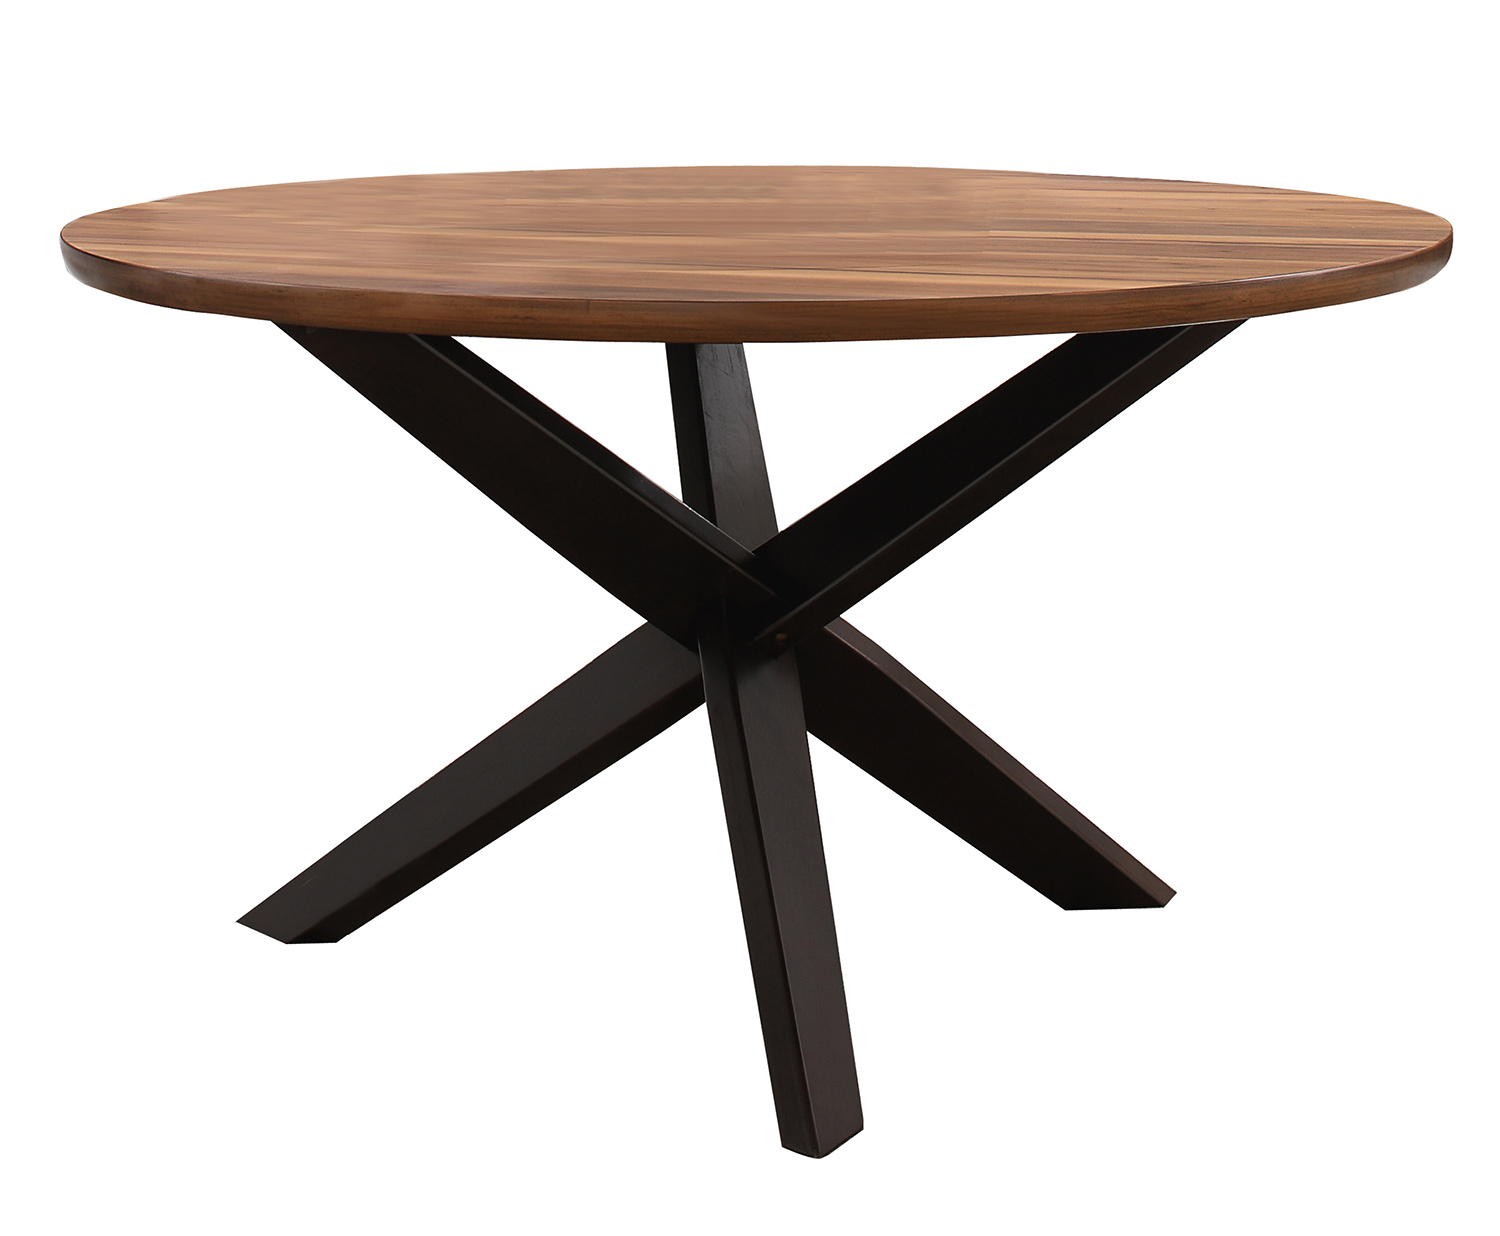 Homelegance Nelina Round Dining Table - Espresso-Natural